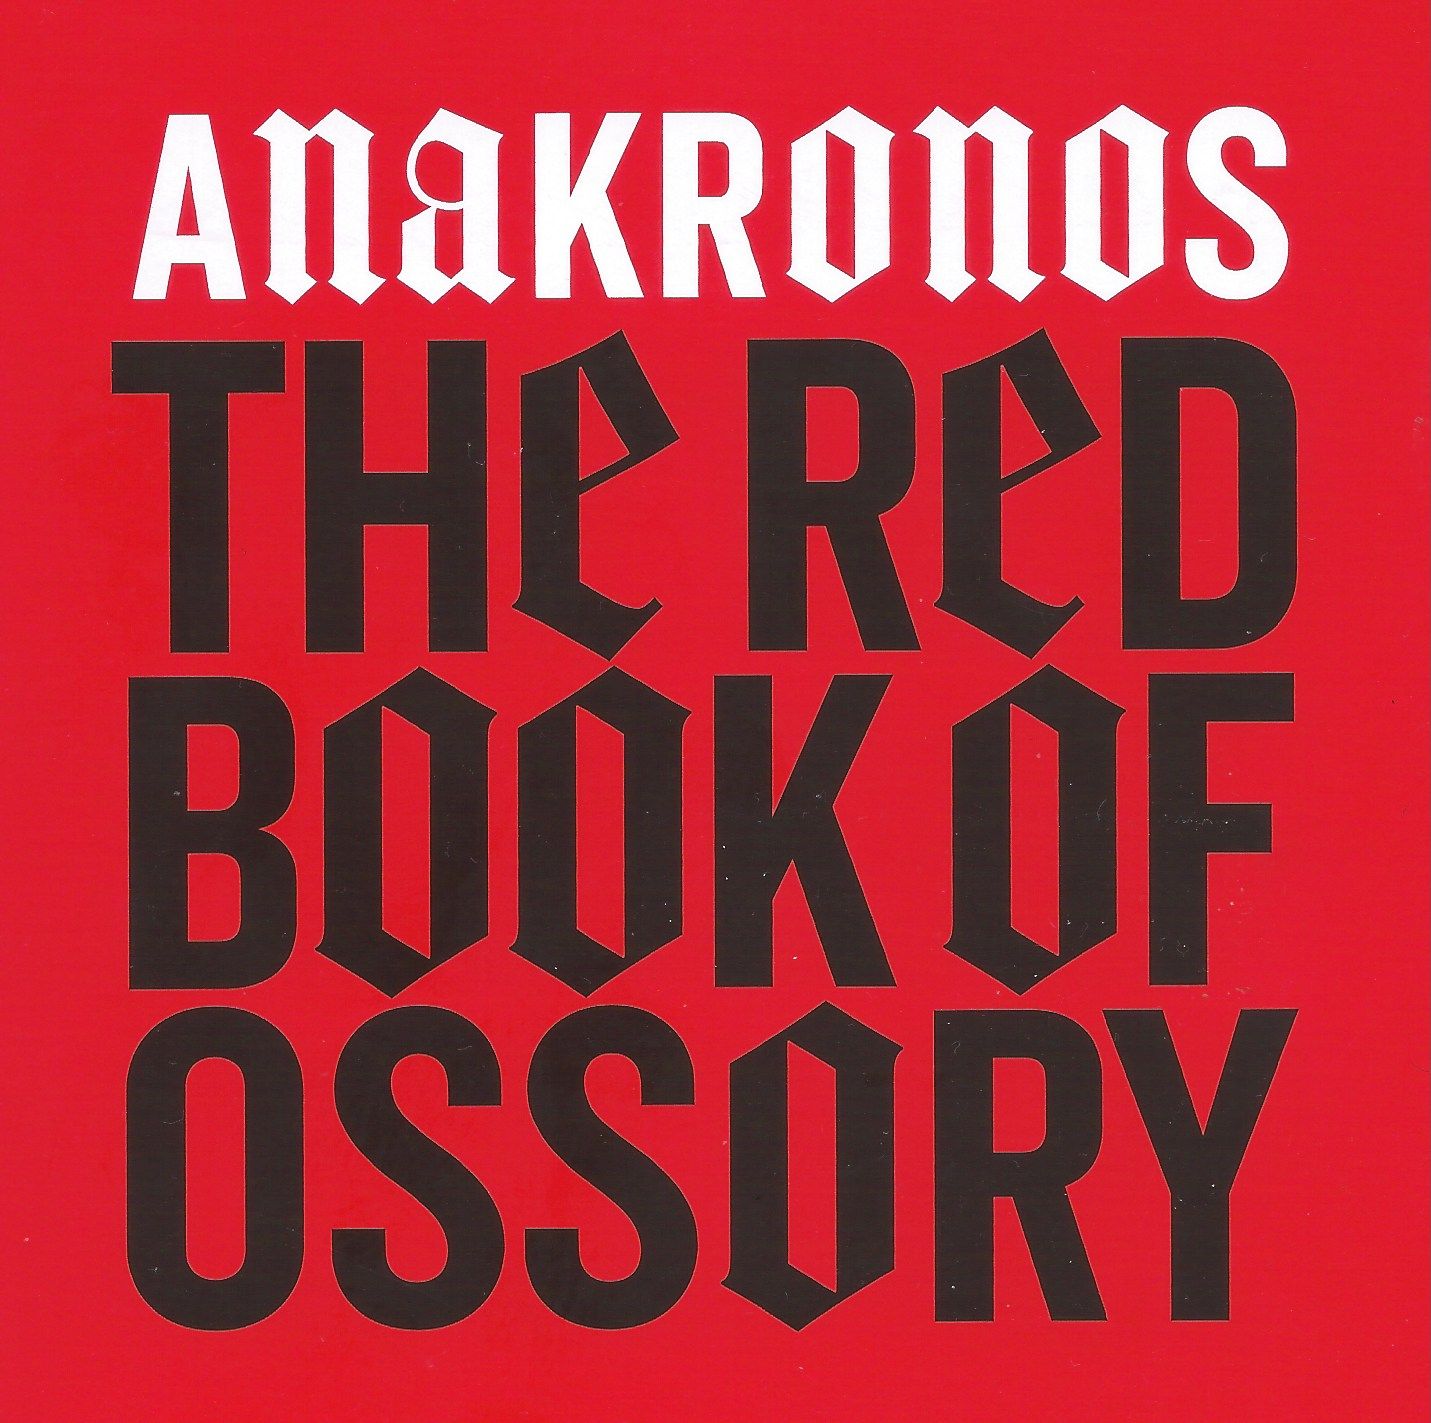 Medieval Music, Jazz, Contemporary Classical, but no kitchen sink: "The Red Book of Ossory"